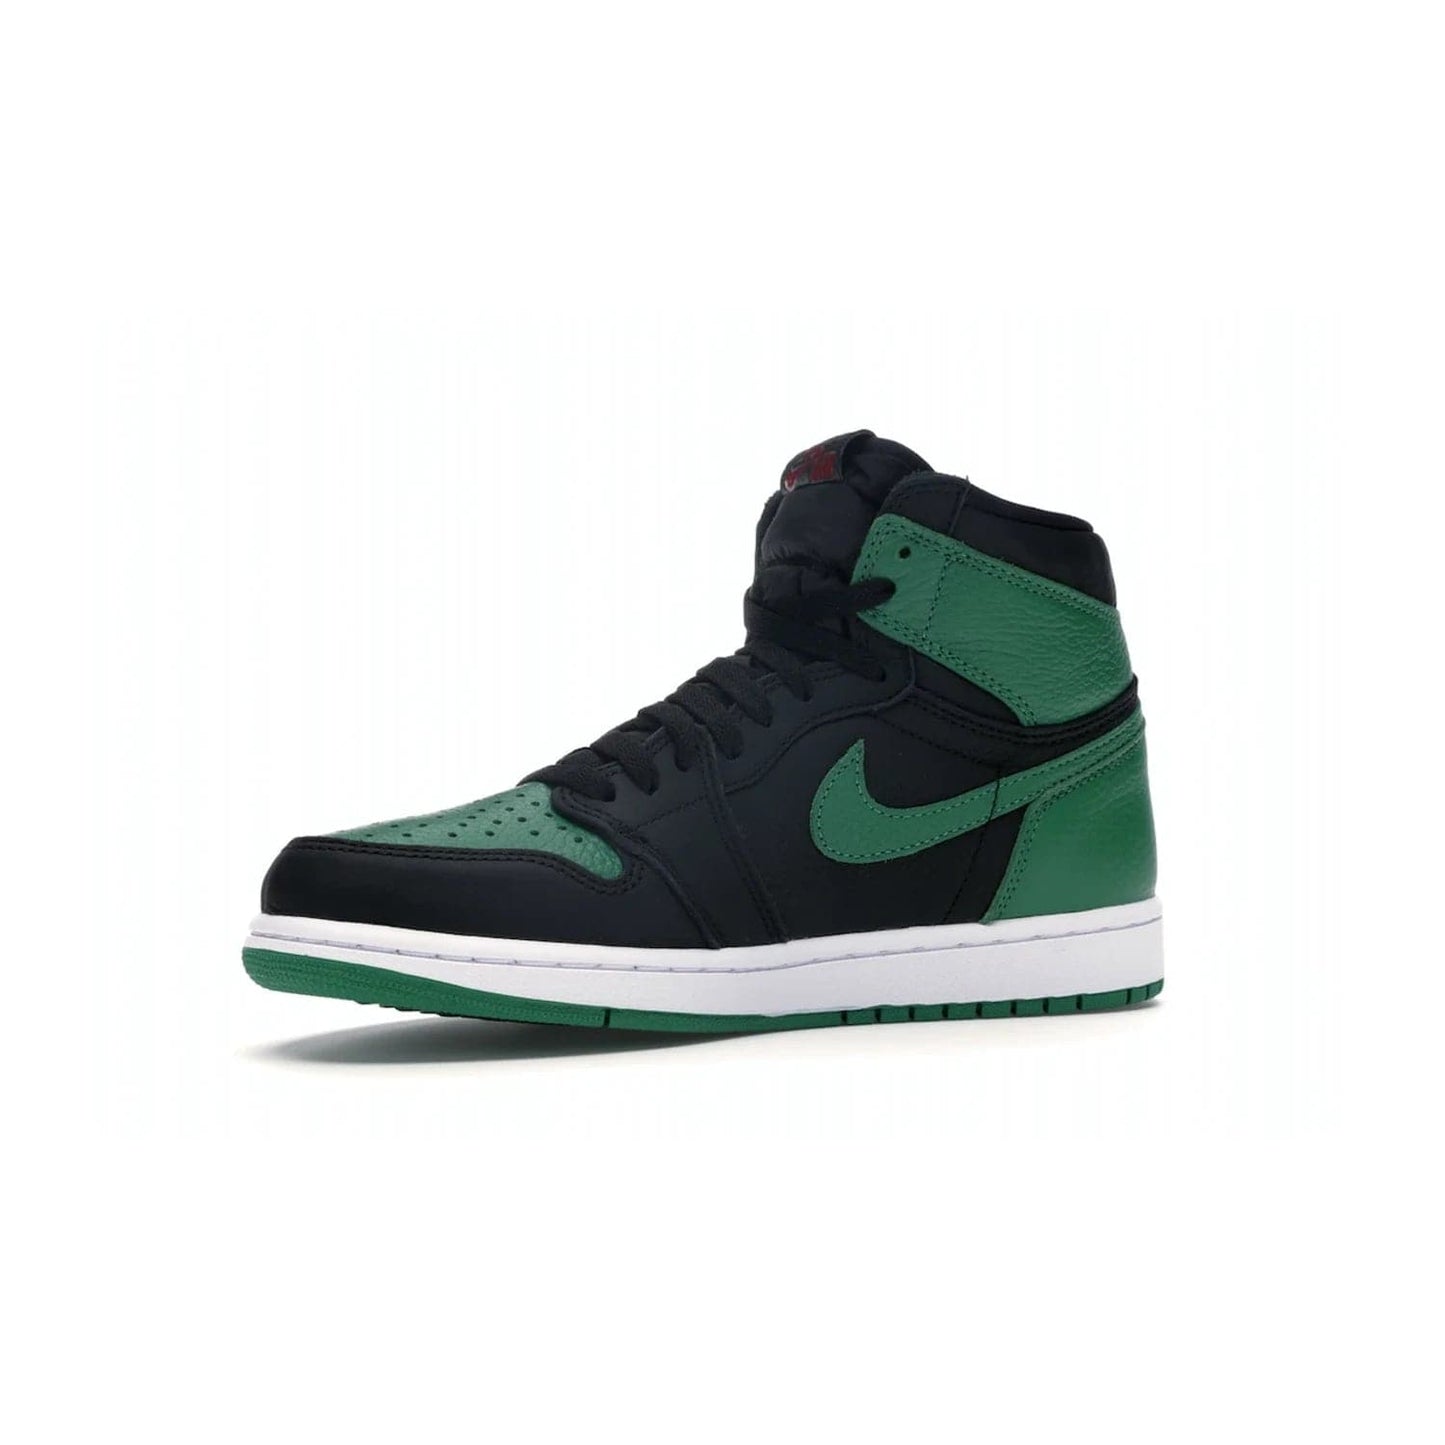 Jordan 1 Retro High Pine Green Black - Image 16 - Only at www.BallersClubKickz.com - Step into fresh style with the Jordan 1 Retro High Pine Green Black. Combining a black tumbled leather upper with green leather overlays, this sneaker features a Gym Red embroidered tongue tag, sail midsole, and pine green outsole for iconic style with a unique twist.